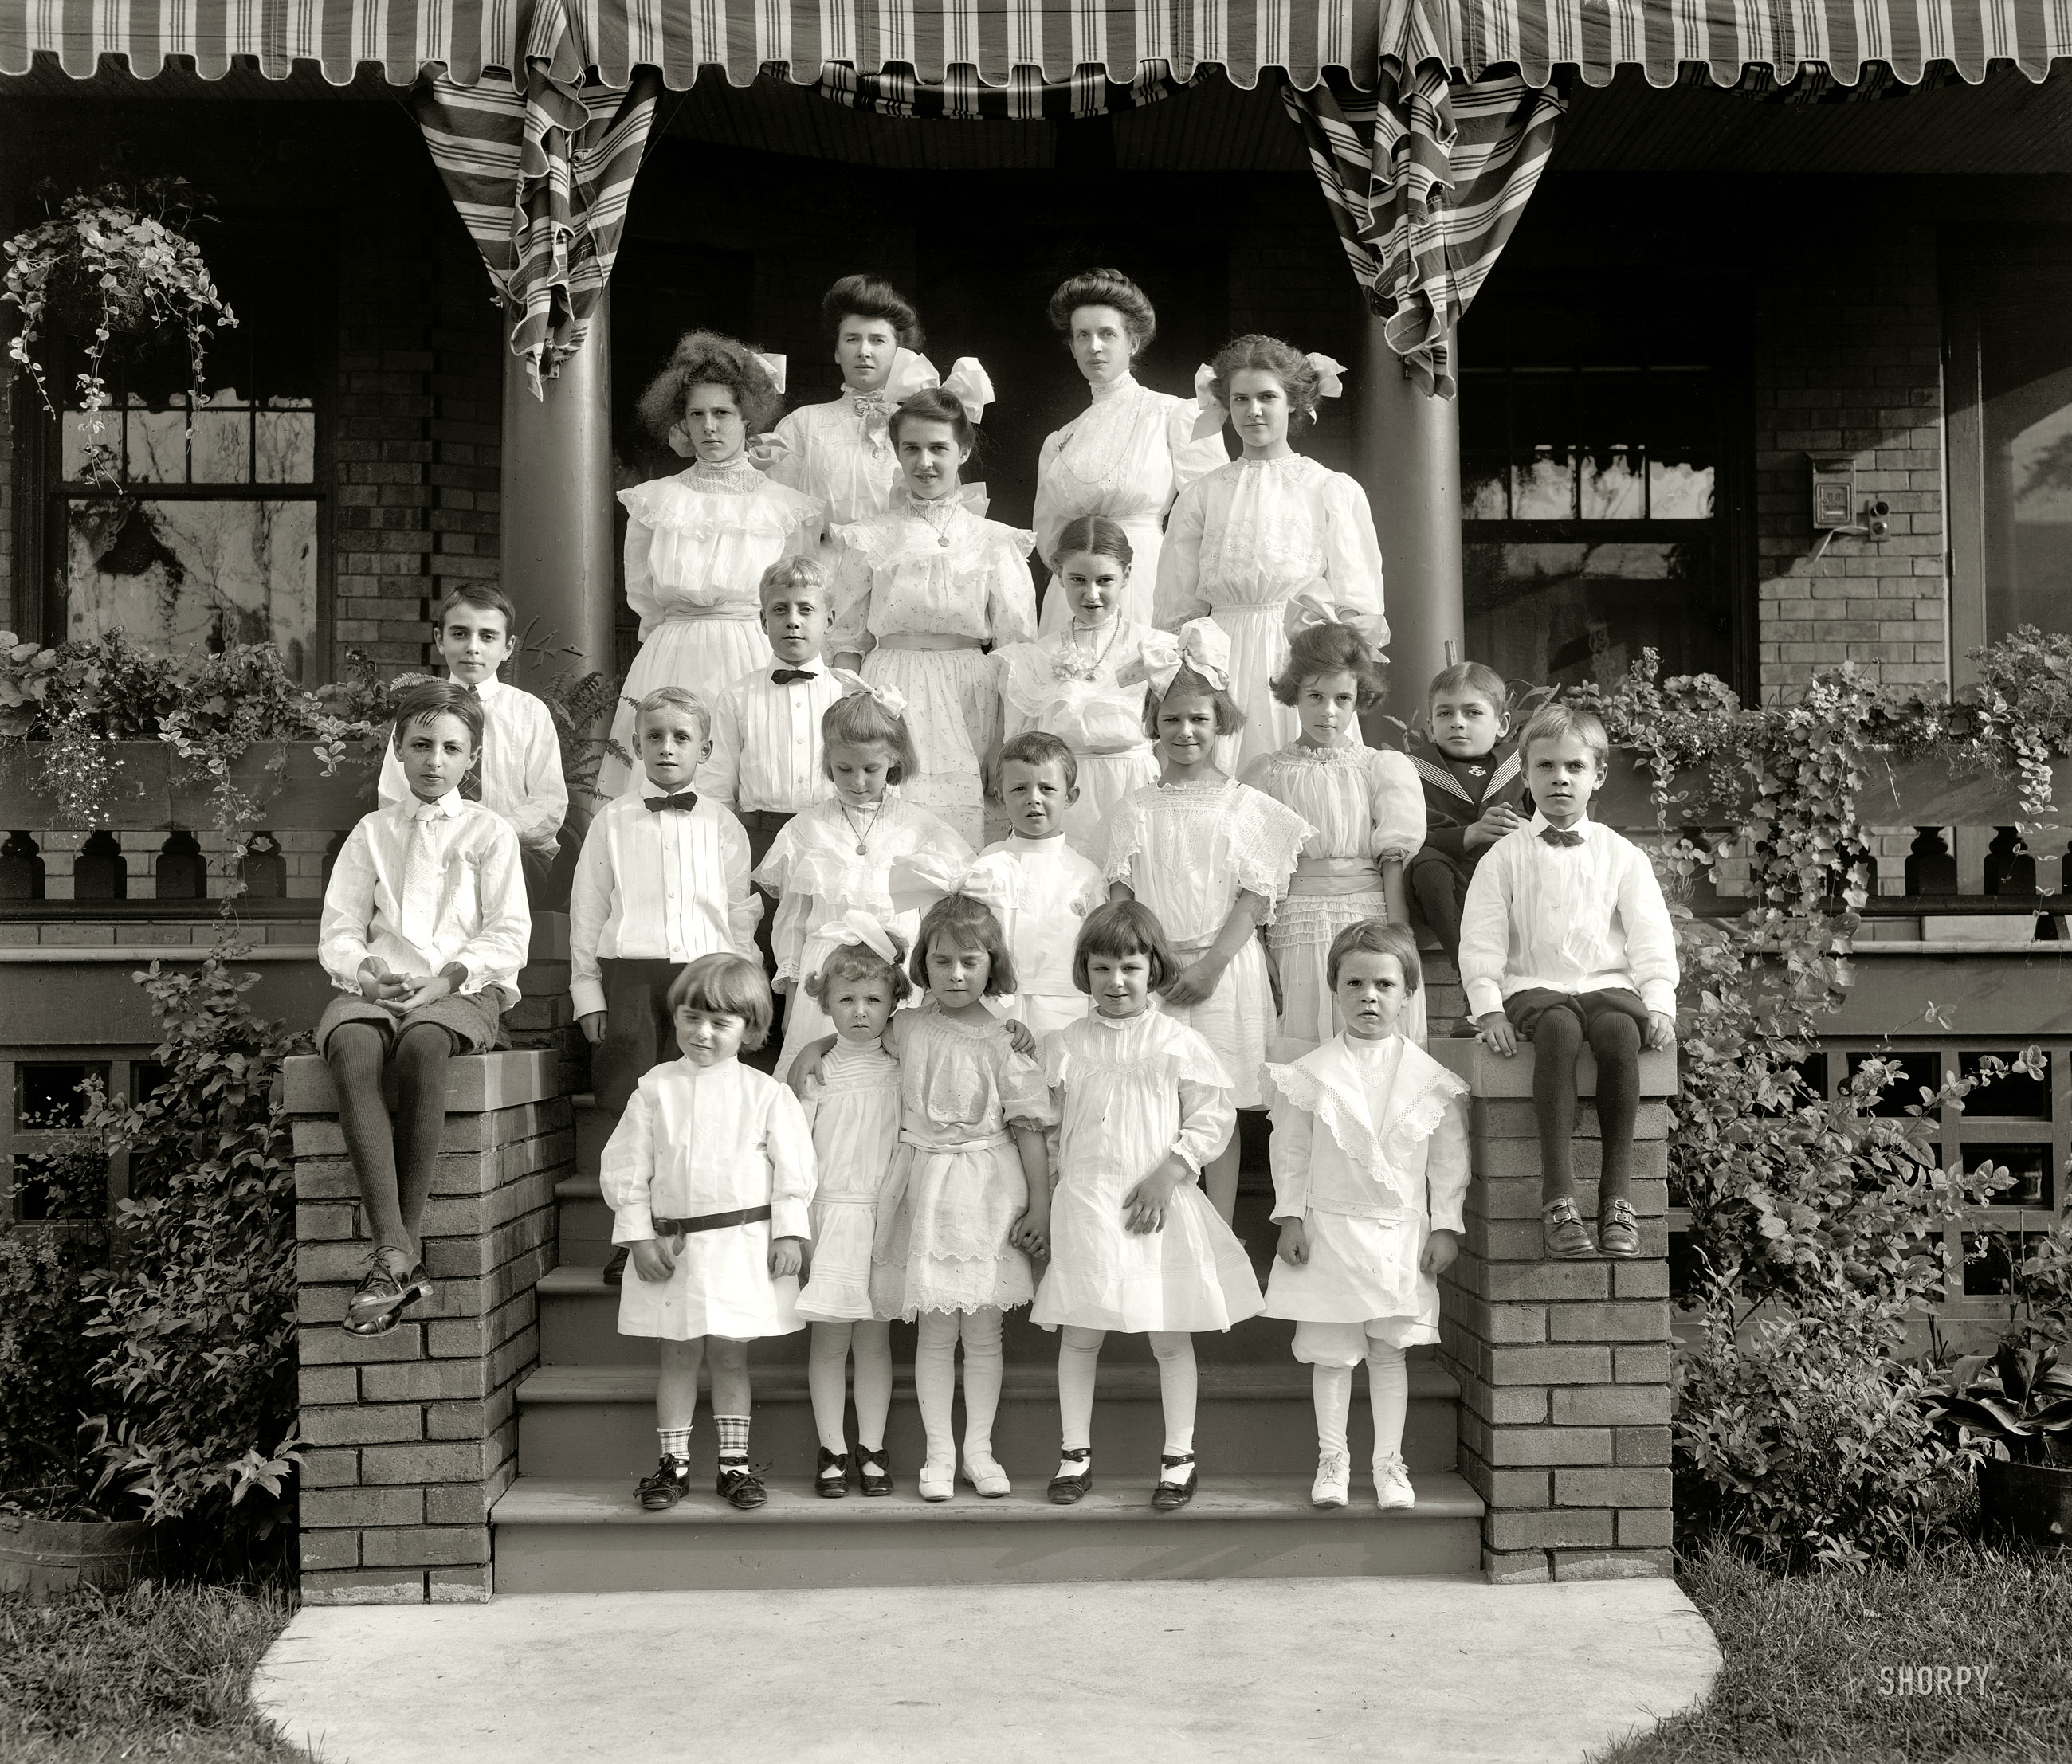 Circa 1910. No caption information for this group portrait, just the notation "Mrs. G.W. Quirse" on the negative. Detroit Publishing Company. View full size.